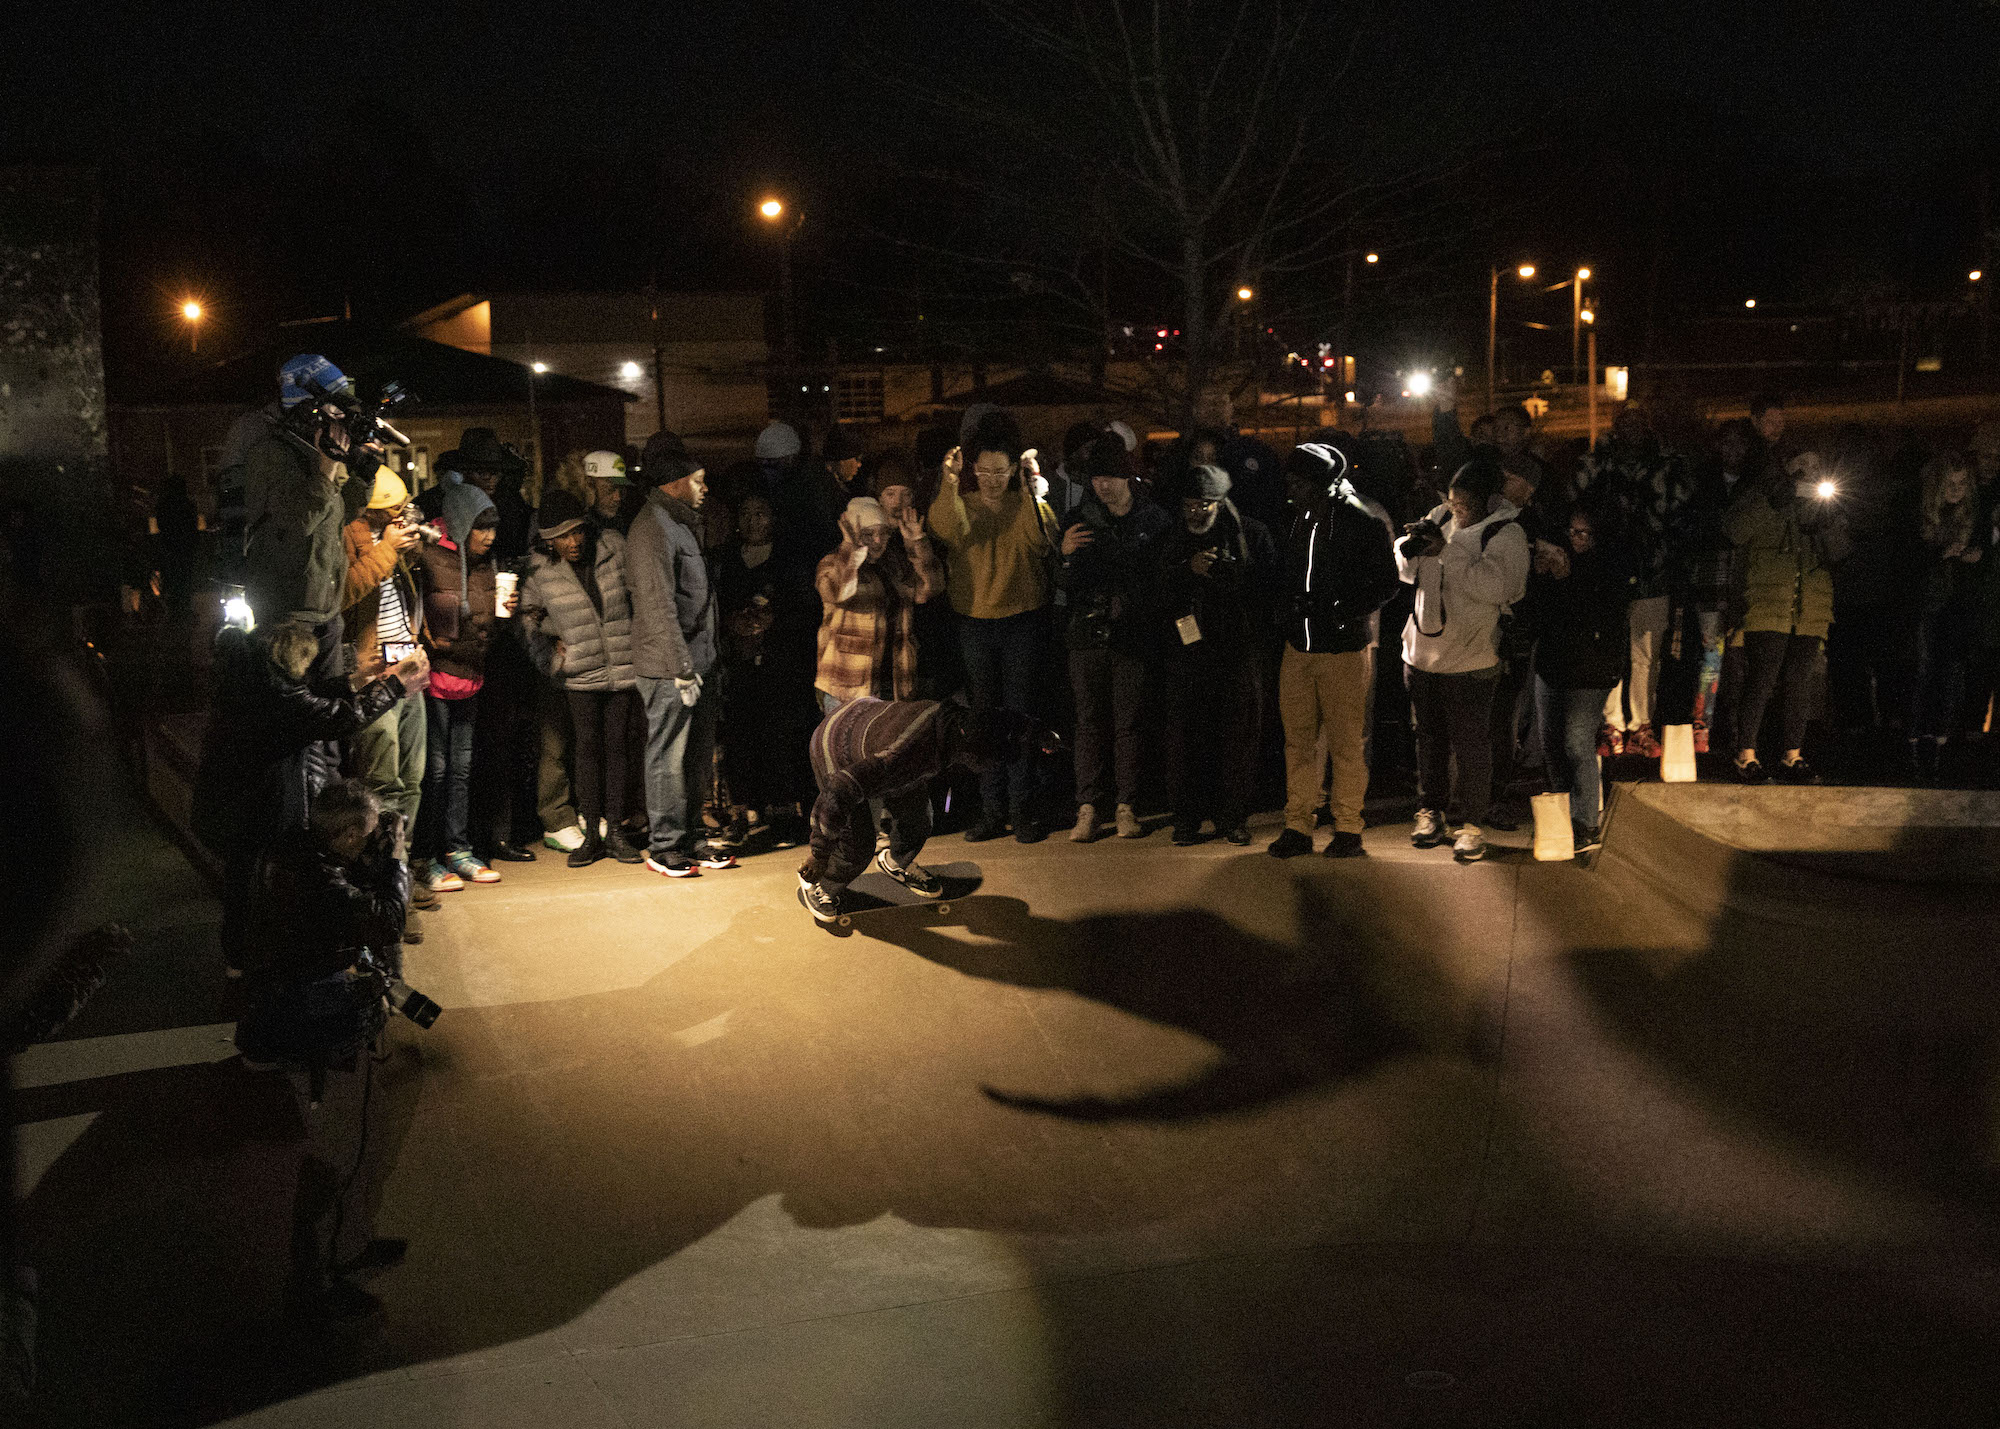 Local skaters ride at the candlelight vigil at Tobey Skatepark.